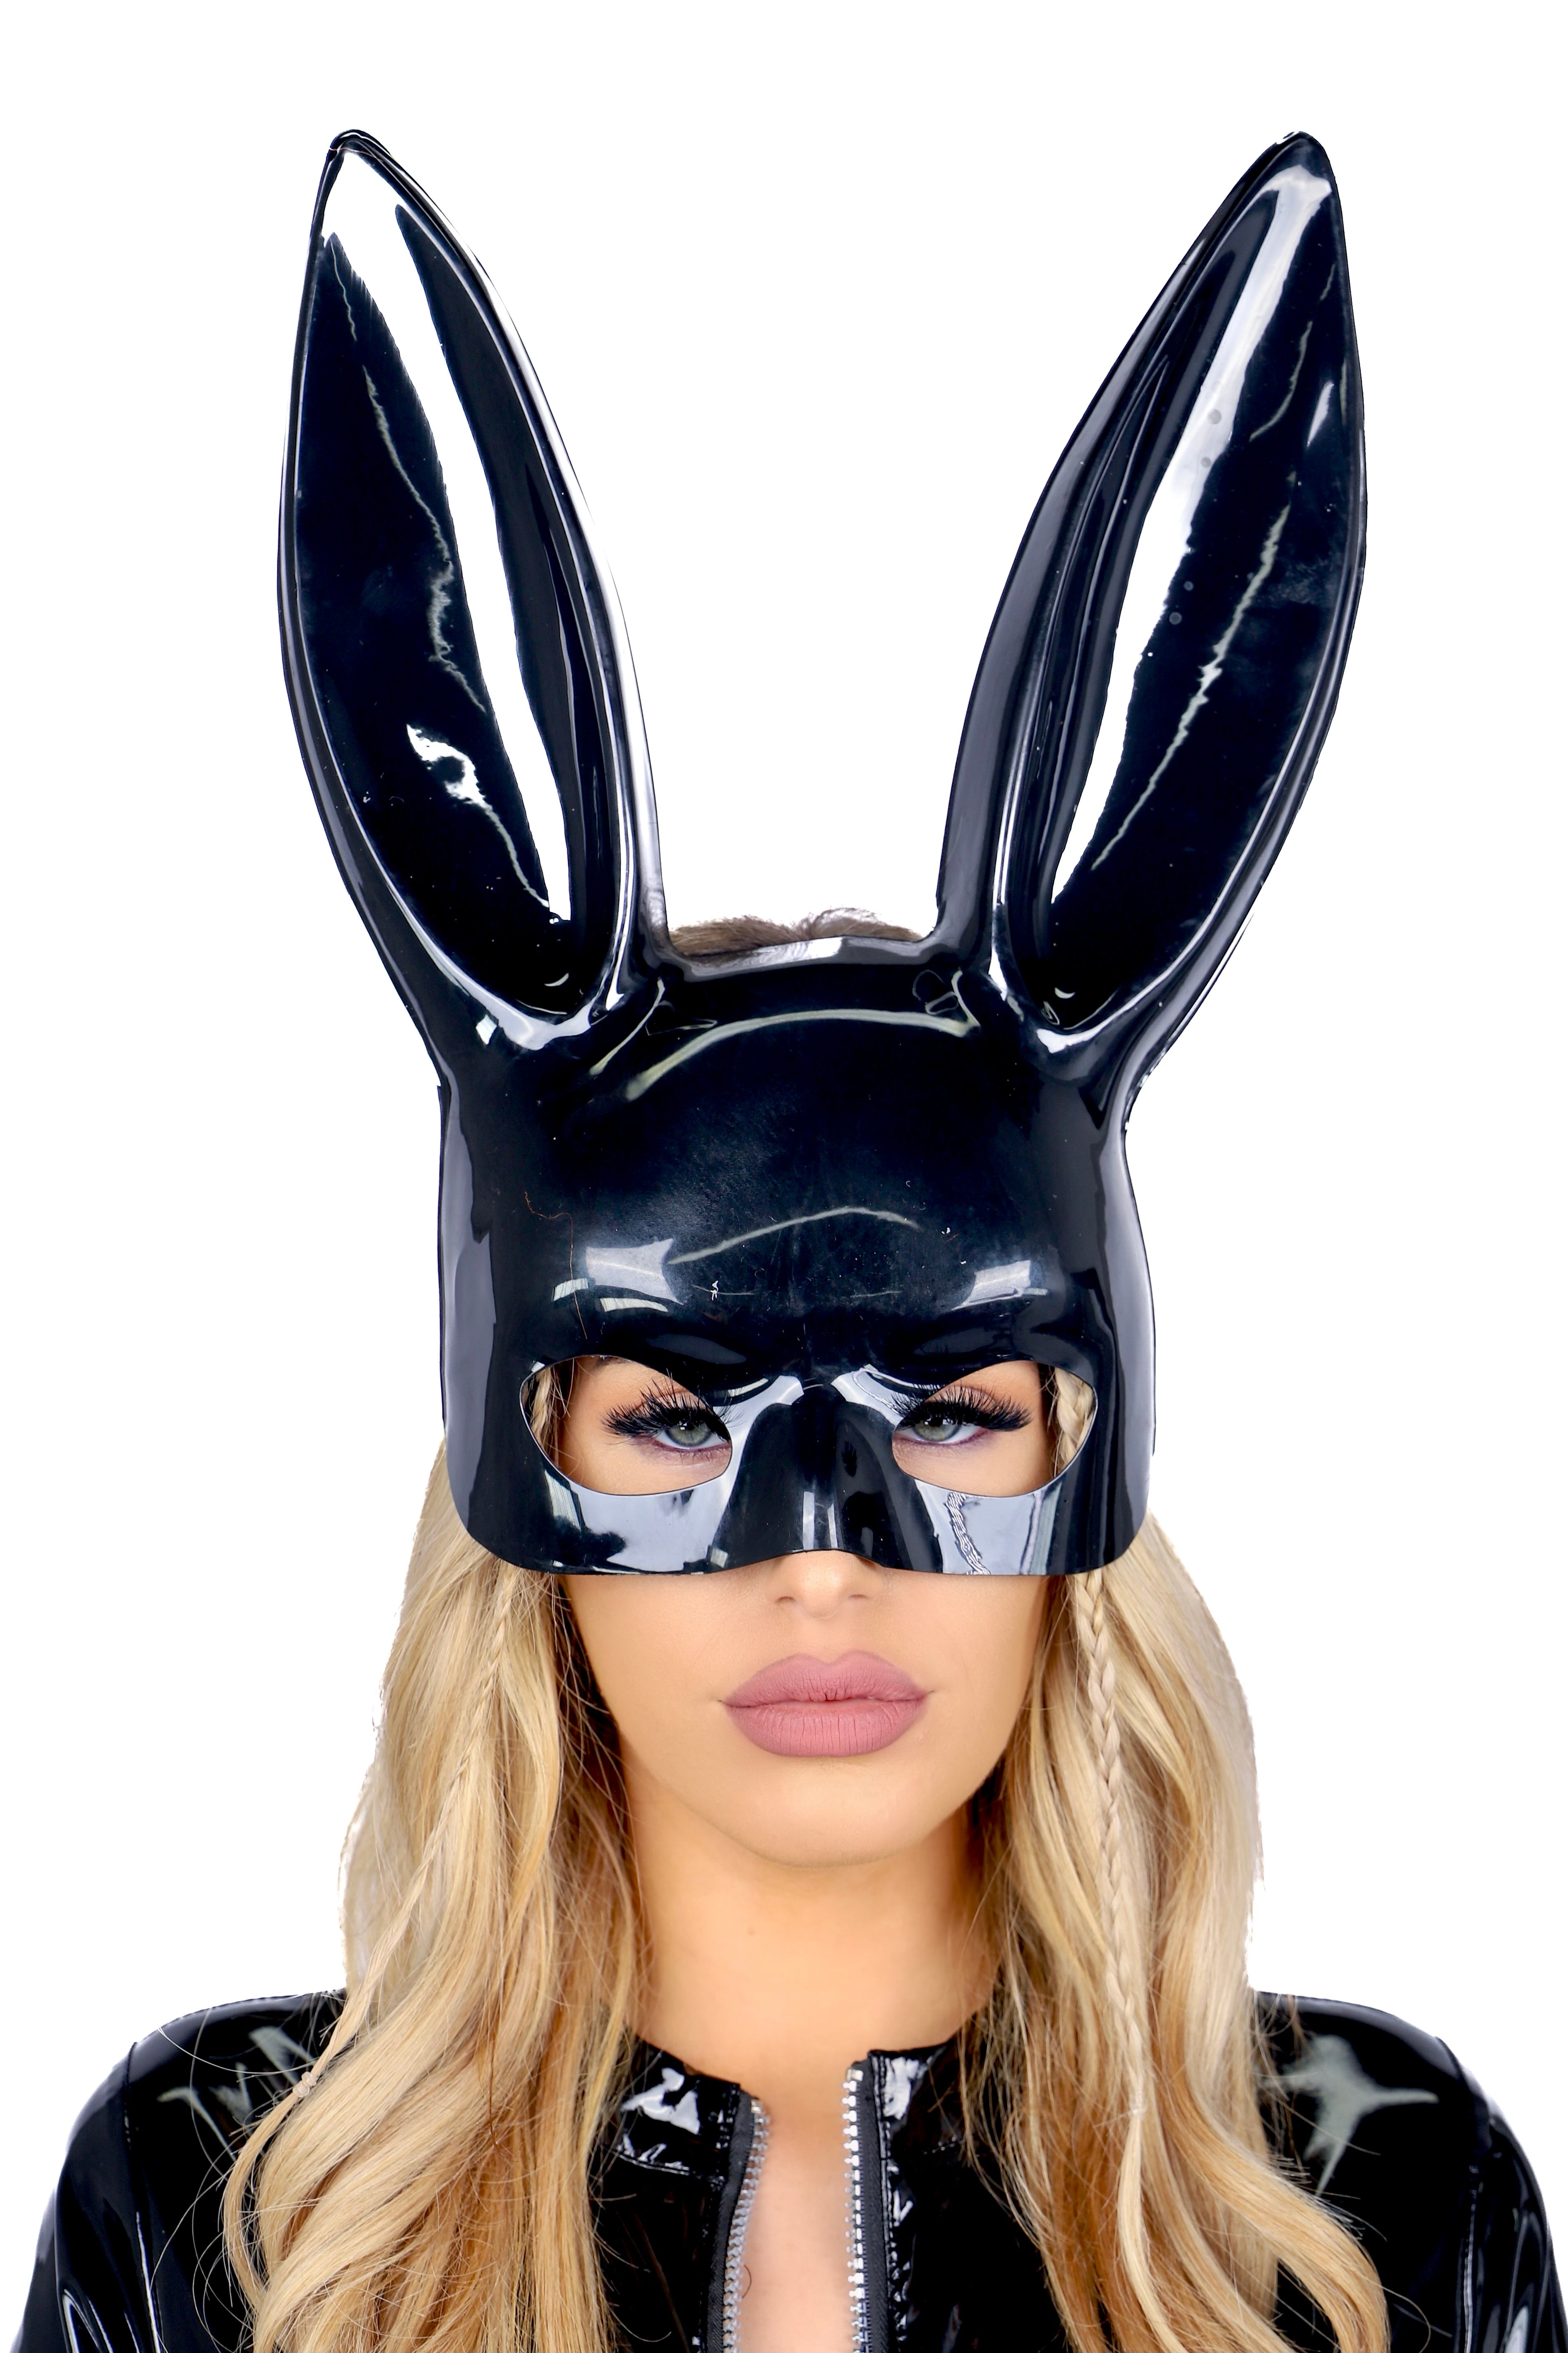 FULL OUTFIT- Sexy Black Bunny (2 pcs)